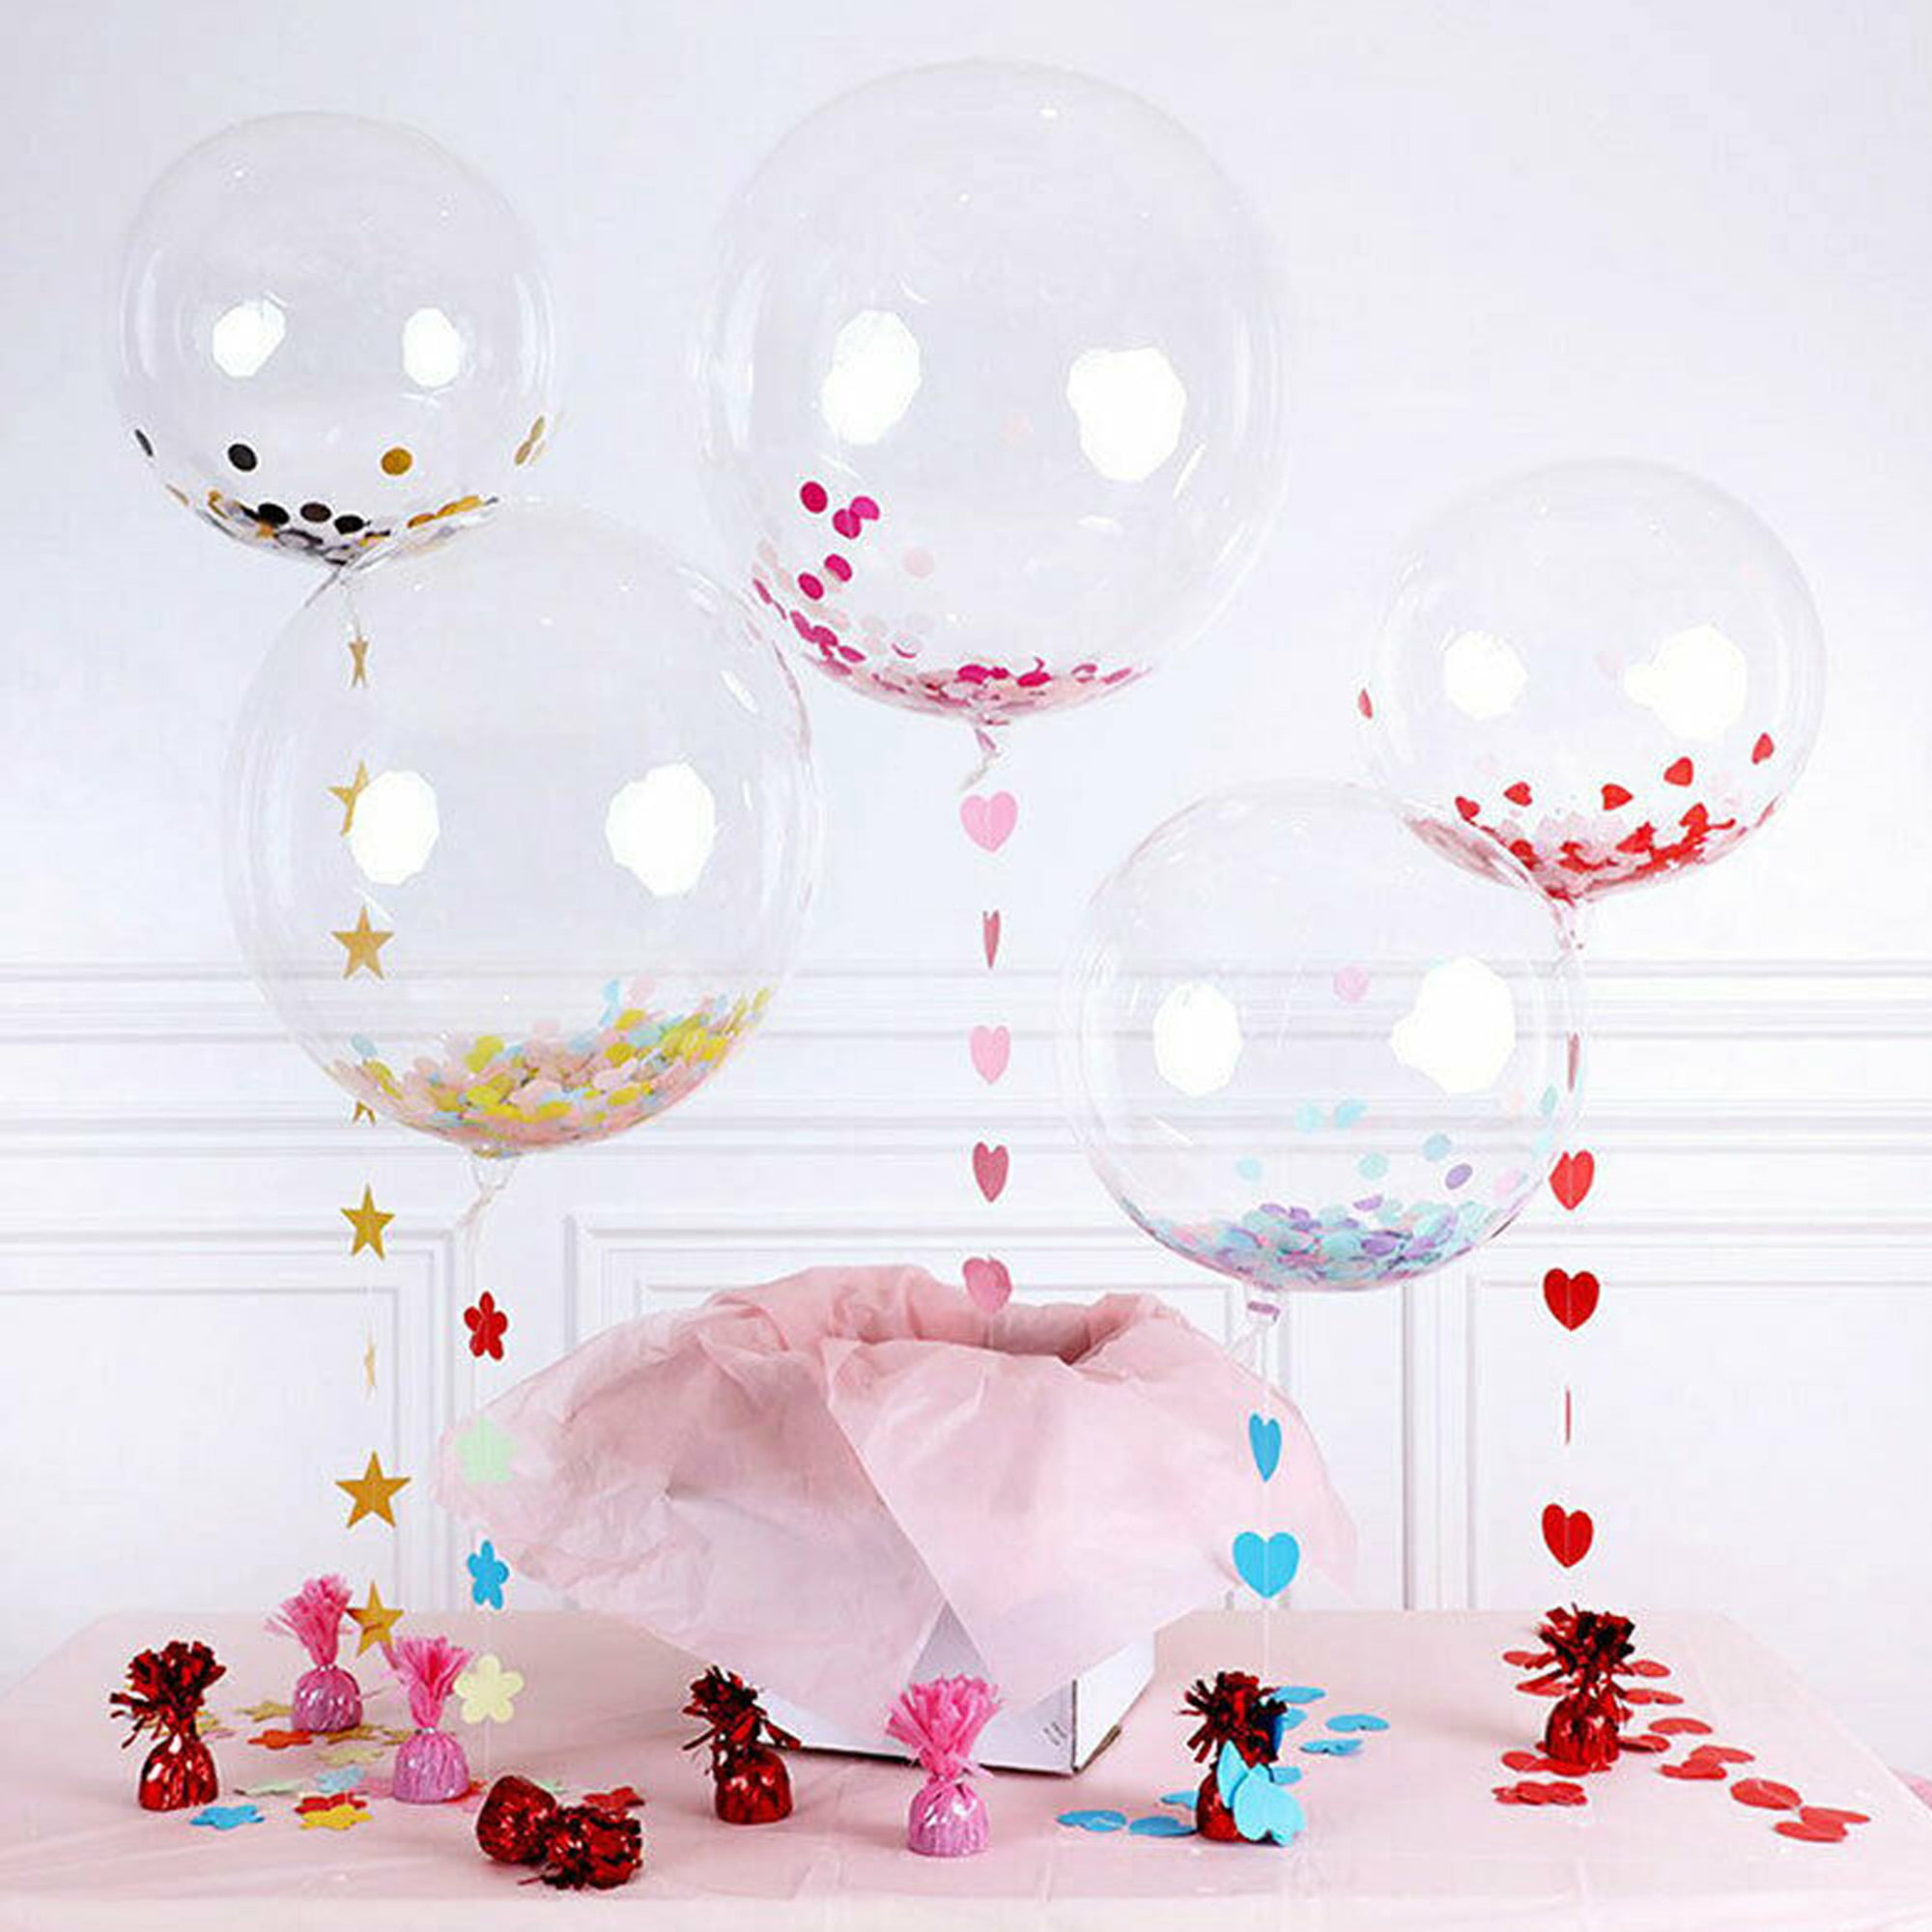  10 Pcs Large Bobo Balloons 15.8 Inch Clear Balloons for Stuffing  Bubble Transparent Balloons with 10 Pcs Mini Plush Bears Bobo Balloons for  Wedding Baby Shower Birthday Party Decorations : Toys & Games